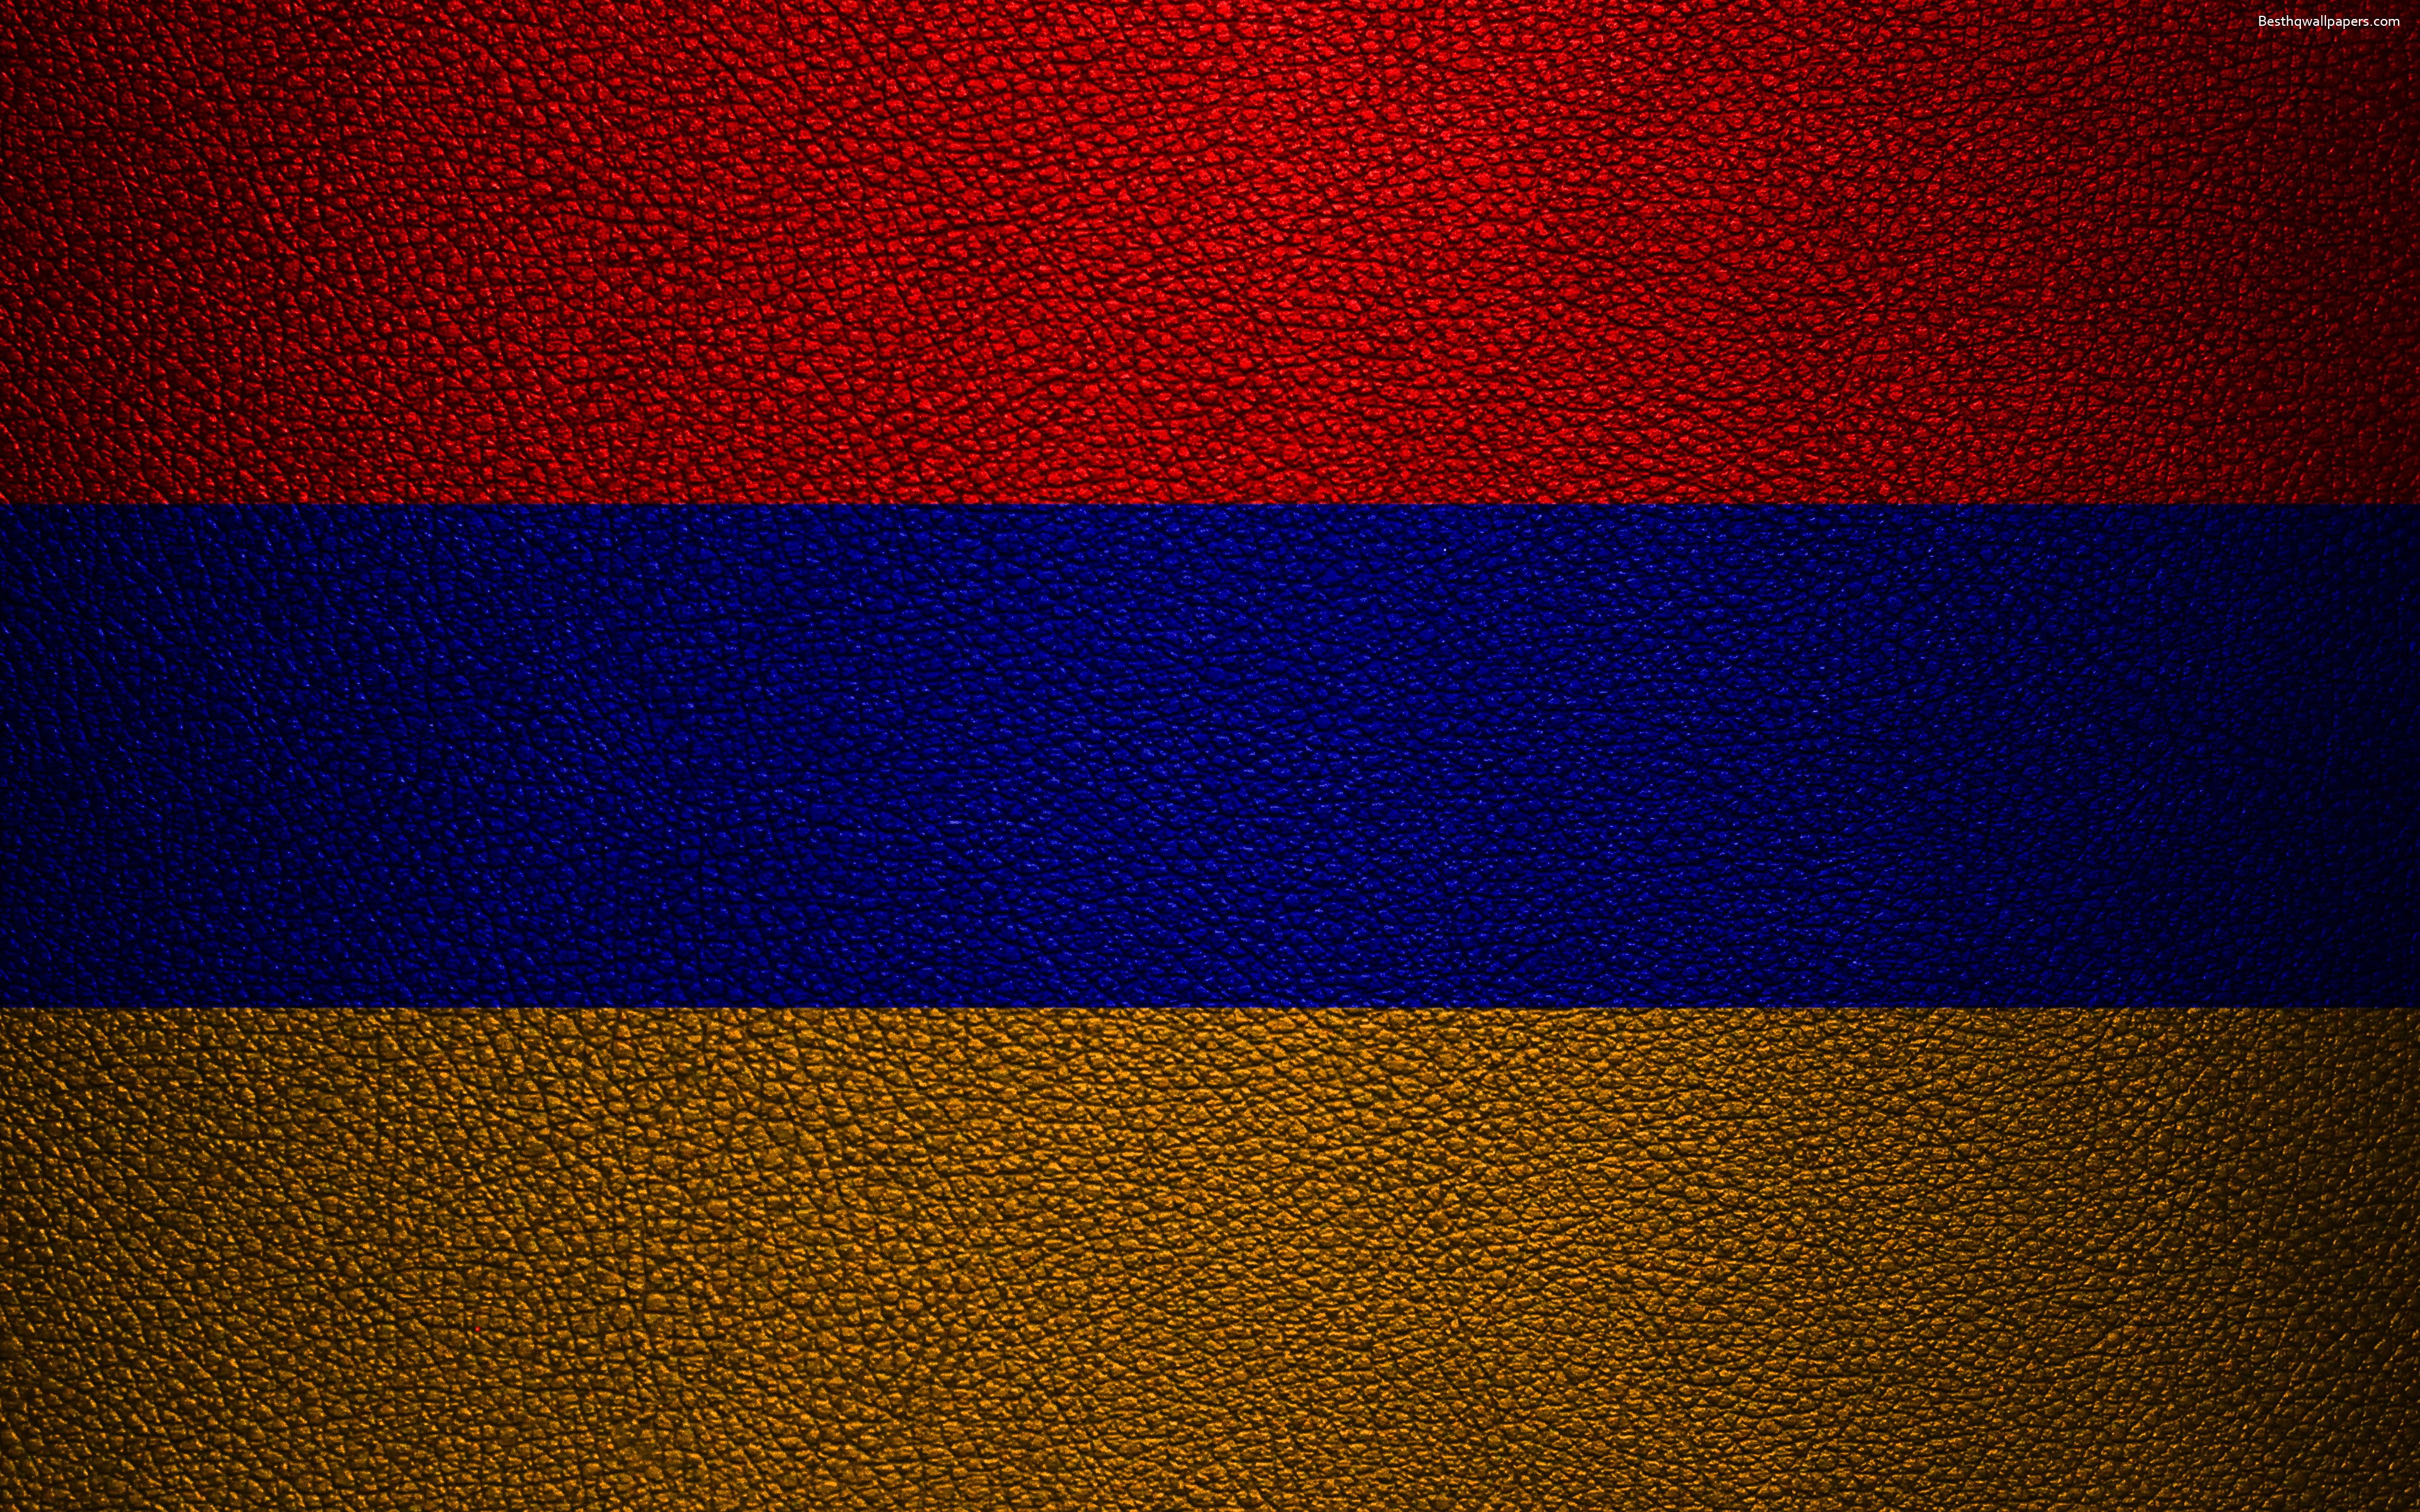 Download wallpaper Flag of Armenia, 4к, leather texture, Armenian flag, Asia, world flags, Armenia for desktop with resolution 3840x2400. High Quality HD picture wallpaper